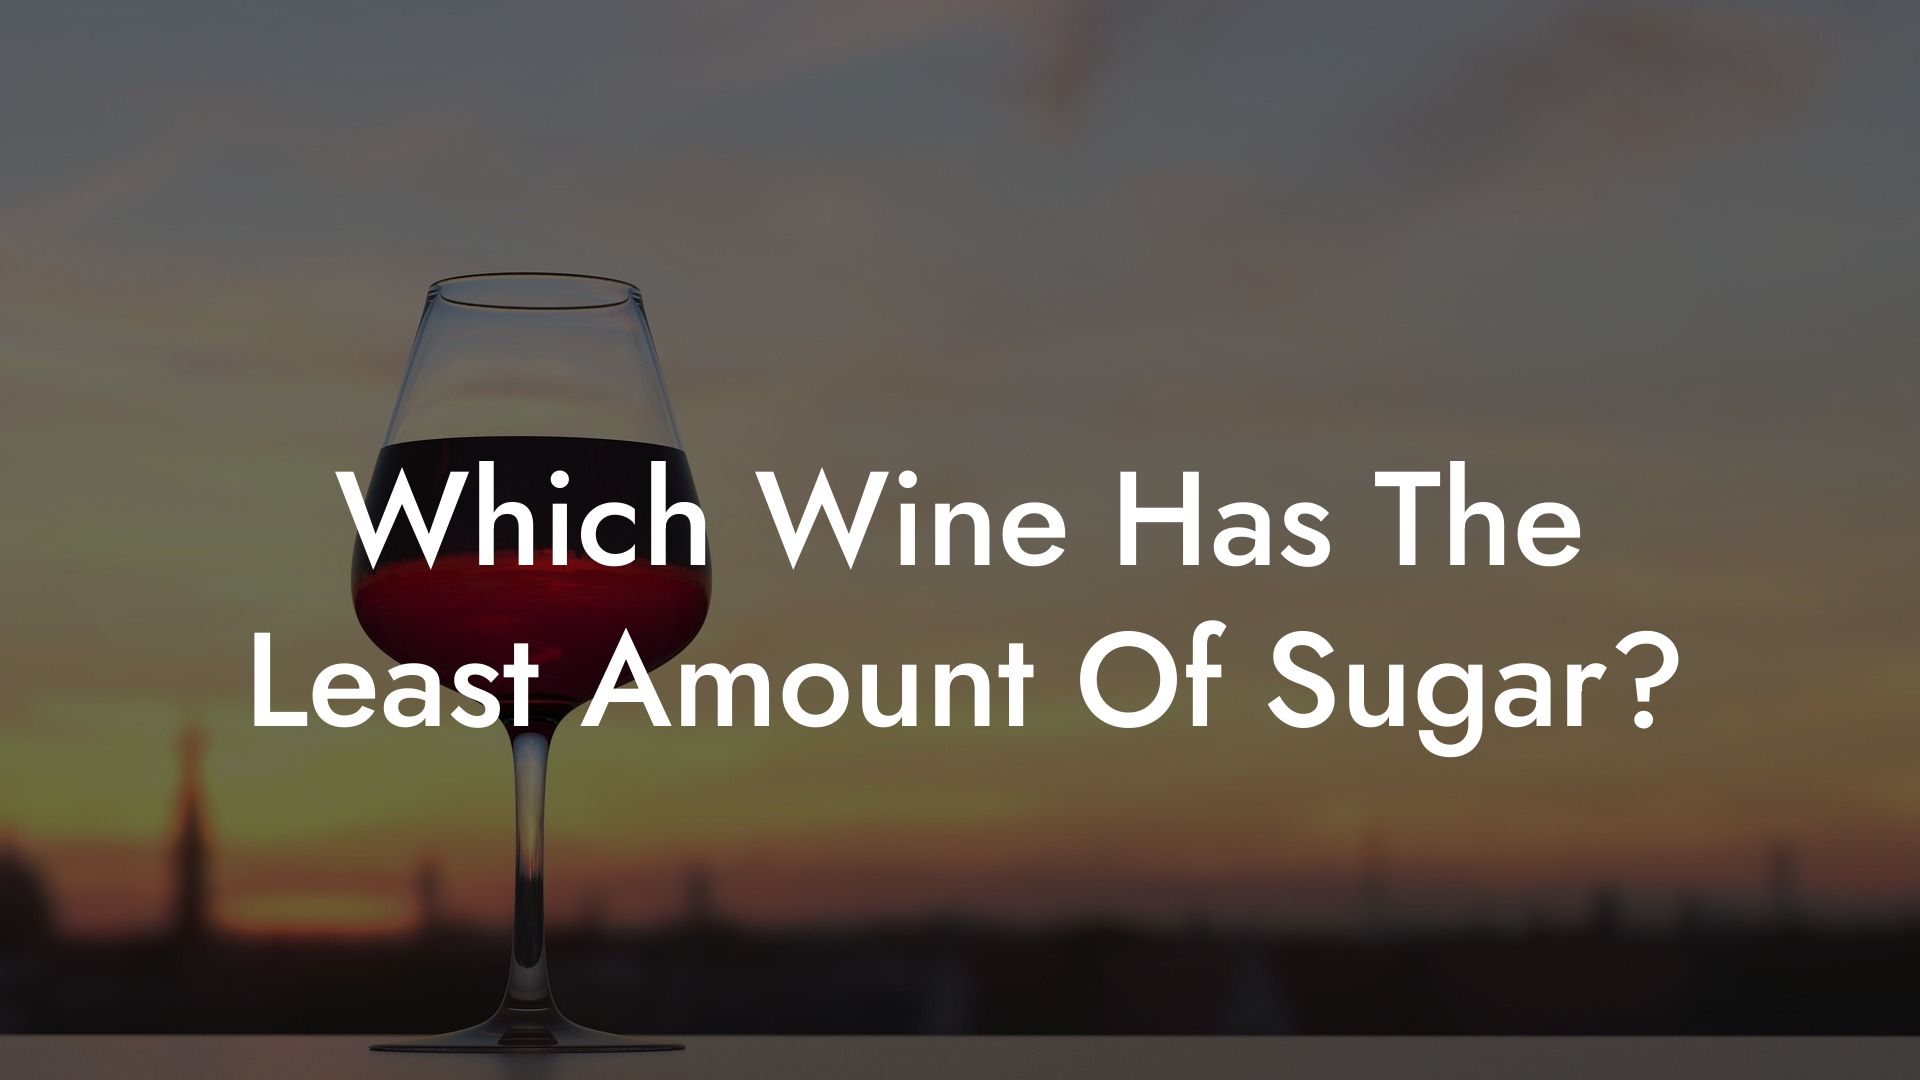 Which Wine Has The Least Amount Of Sugar